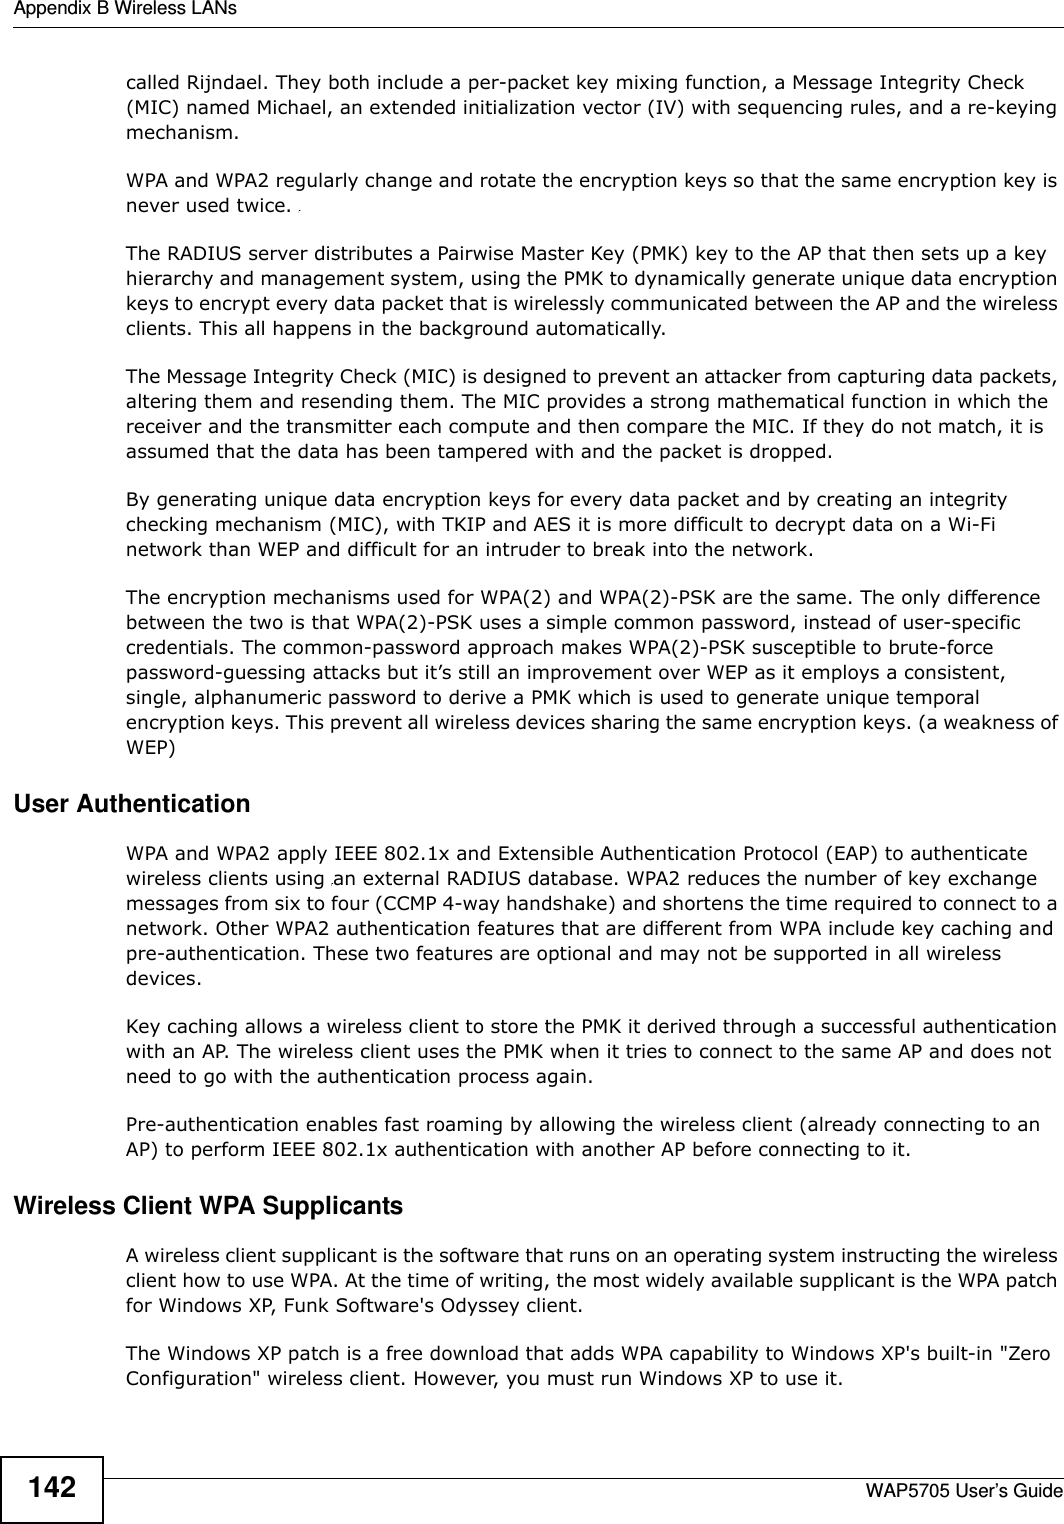 Appendix B Wireless LANsWAP5705 User’s Guide142called Rijndael. They both include a per-packet key mixing function, a Message Integrity Check (MIC) named Michael, an extended initialization vector (IV) with sequencing rules, and a re-keying mechanism.WPA and WPA2 regularly change and rotate the encryption keys so that the same encryption key is never used twice. The RADIUS server distributes a Pairwise Master Key (PMK) key to the AP that then sets up a key hierarchy and management system, using the PMK to dynamically generate unique data encryption keys to encrypt every data packet that is wirelessly communicated between the AP and the wireless clients. This all happens in the background automatically.The Message Integrity Check (MIC) is designed to prevent an attacker from capturing data packets, altering them and resending them. The MIC provides a strong mathematical function in which the receiver and the transmitter each compute and then compare the MIC. If they do not match, it is assumed that the data has been tampered with and the packet is dropped. By generating unique data encryption keys for every data packet and by creating an integrity checking mechanism (MIC), with TKIP and AES it is more difficult to decrypt data on a Wi-Fi network than WEP and difficult for an intruder to break into the network. The encryption mechanisms used for WPA(2) and WPA(2)-PSK are the same. The only difference between the two is that WPA(2)-PSK uses a simple common password, instead of user-specific credentials. The common-password approach makes WPA(2)-PSK susceptible to brute-force password-guessing attacks but it’s still an improvement over WEP as it employs a consistent, single, alphanumeric password to derive a PMK which is used to generate unique temporal encryption keys. This prevent all wireless devices sharing the same encryption keys. (a weakness of WEP)User Authentication WPA and WPA2 apply IEEE 802.1x and Extensible Authentication Protocol (EAP) to authenticate wireless clients using an external RADIUS database. WPA2 reduces the number of key exchange messages from six to four (CCMP 4-way handshake) and shortens the time required to connect to a network. Other WPA2 authentication features that are different from WPA include key caching and pre-authentication. These two features are optional and may not be supported in all wireless devices.Key caching allows a wireless client to store the PMK it derived through a successful authentication with an AP. The wireless client uses the PMK when it tries to connect to the same AP and does not need to go with the authentication process again.Pre-authentication enables fast roaming by allowing the wireless client (already connecting to an AP) to perform IEEE 802.1x authentication with another AP before connecting to it.Wireless Client WPA SupplicantsA wireless client supplicant is the software that runs on an operating system instructing the wireless client how to use WPA. At the time of writing, the most widely available supplicant is the WPA patch for Windows XP, Funk Software&apos;s Odyssey client. The Windows XP patch is a free download that adds WPA capability to Windows XP&apos;s built-in &quot;Zero Configuration&quot; wireless client. However, you must run Windows XP to use it. 